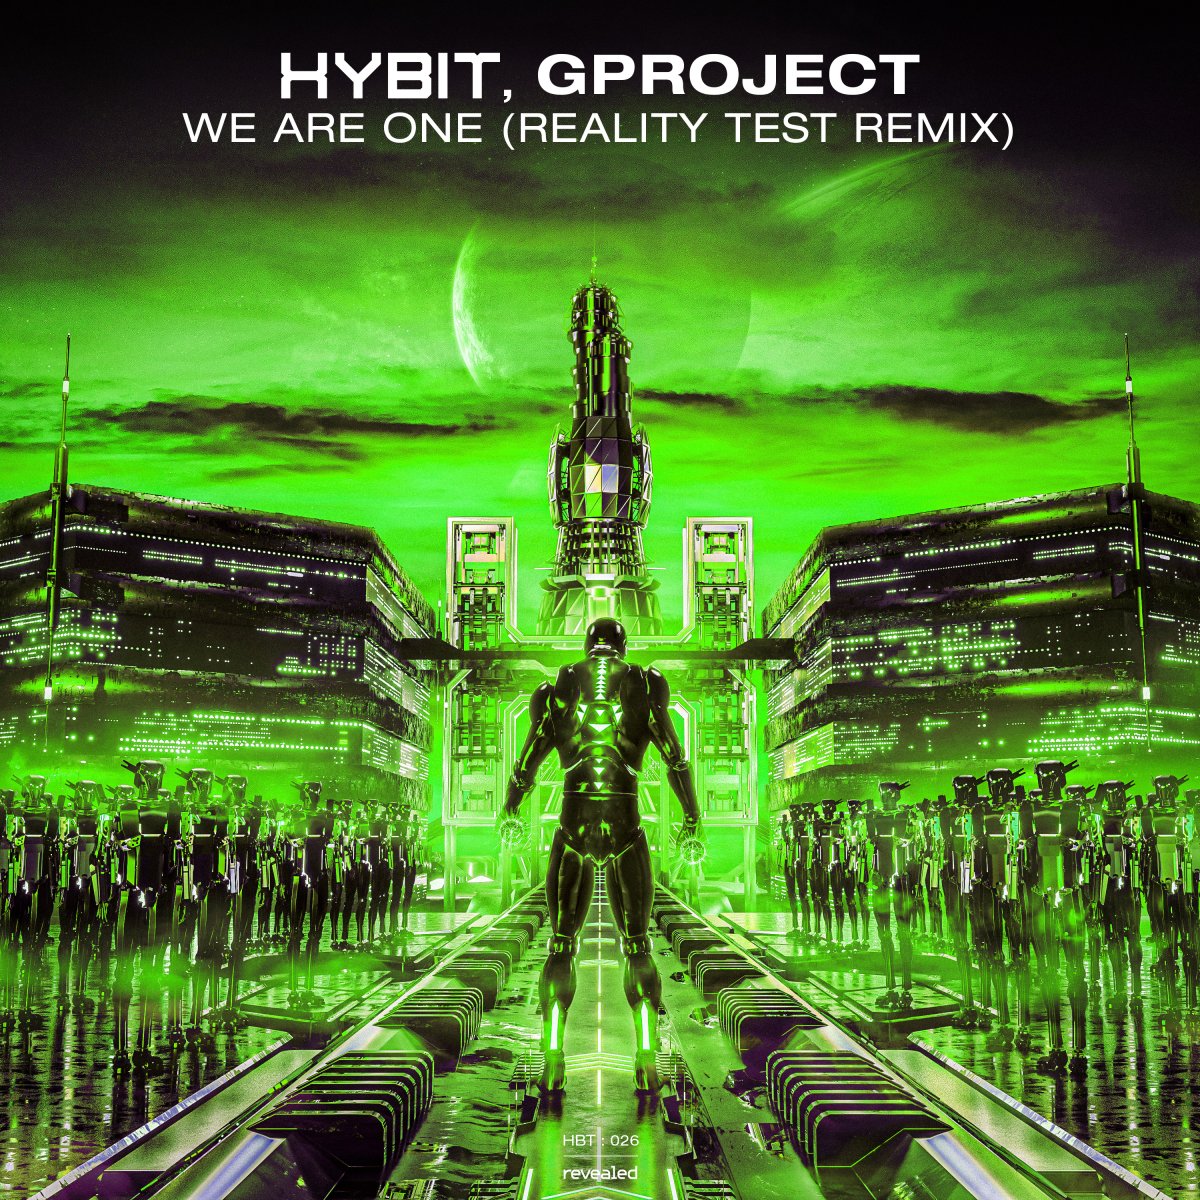 We Are One (Reality Test Remix) - HYBIT⁠ & Gproject⁠ 